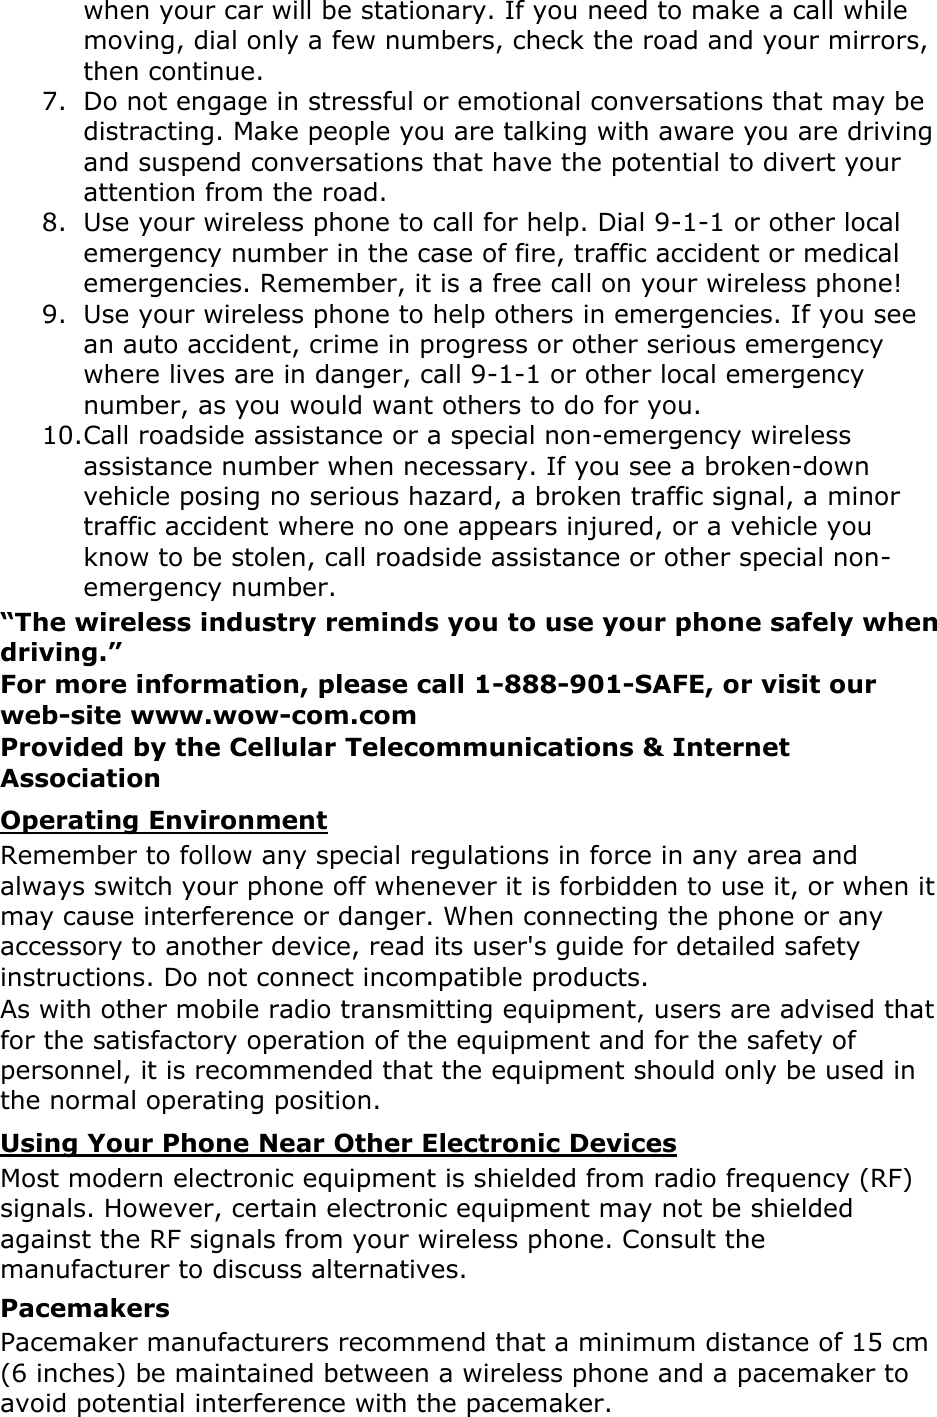 Page 14 of Samsung Electronics Co GTI9070P Cellular/PCS GSM/EDGE/WCDMA Phone with WLAN, RFID and Bluetooth User Manual